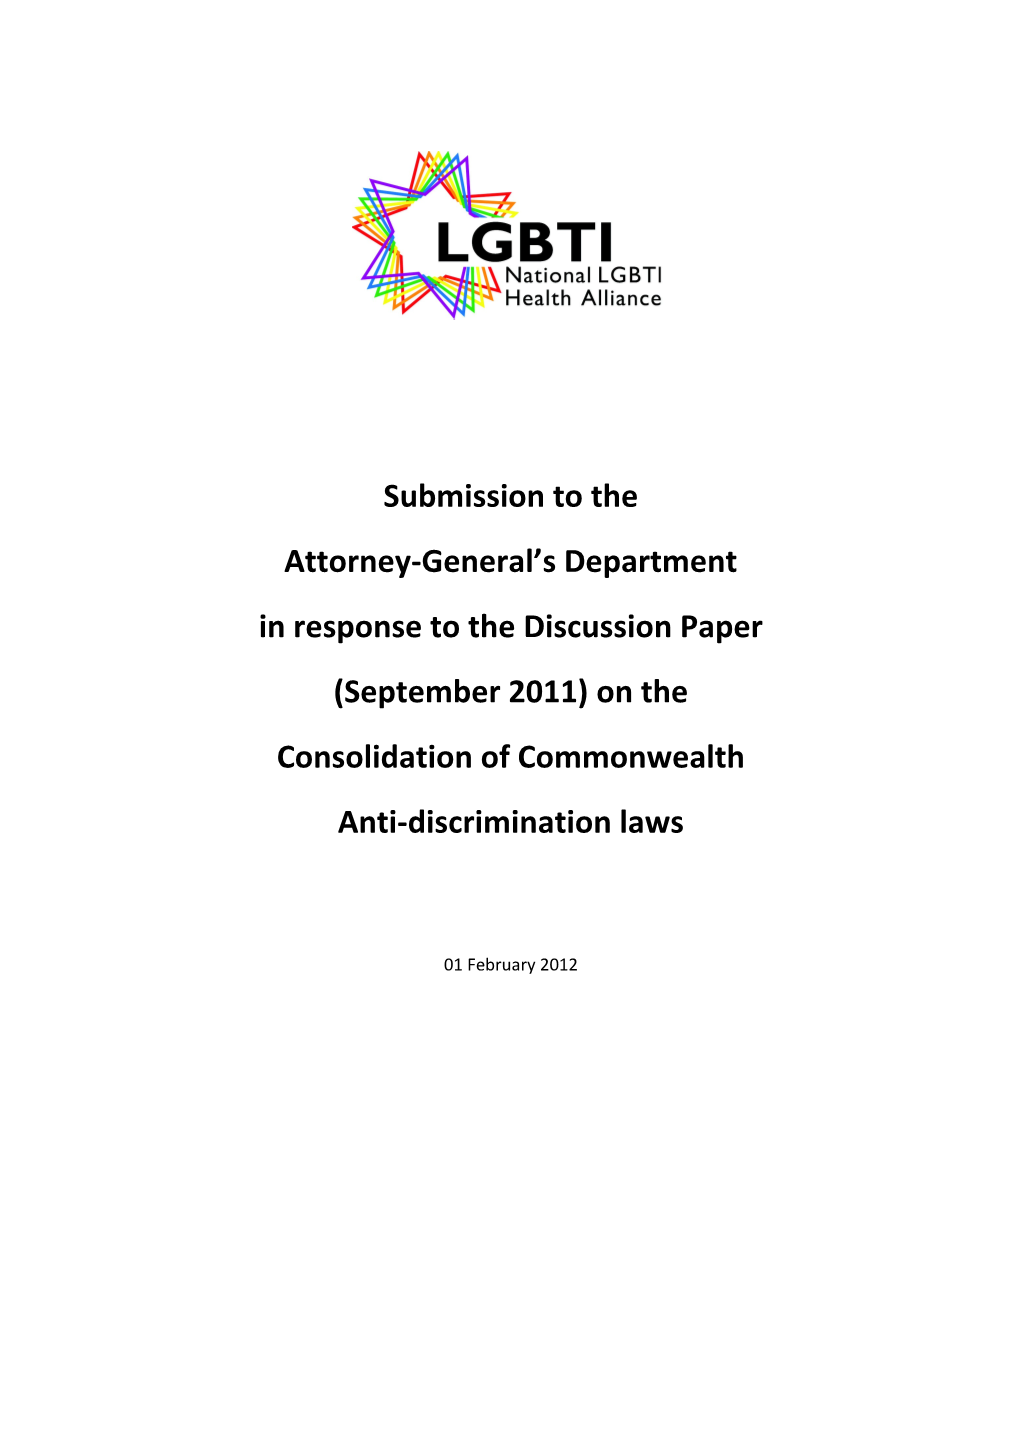 Submission on the Consolidation of Commonwealth Anti-Discrimination Laws - National LGBTI